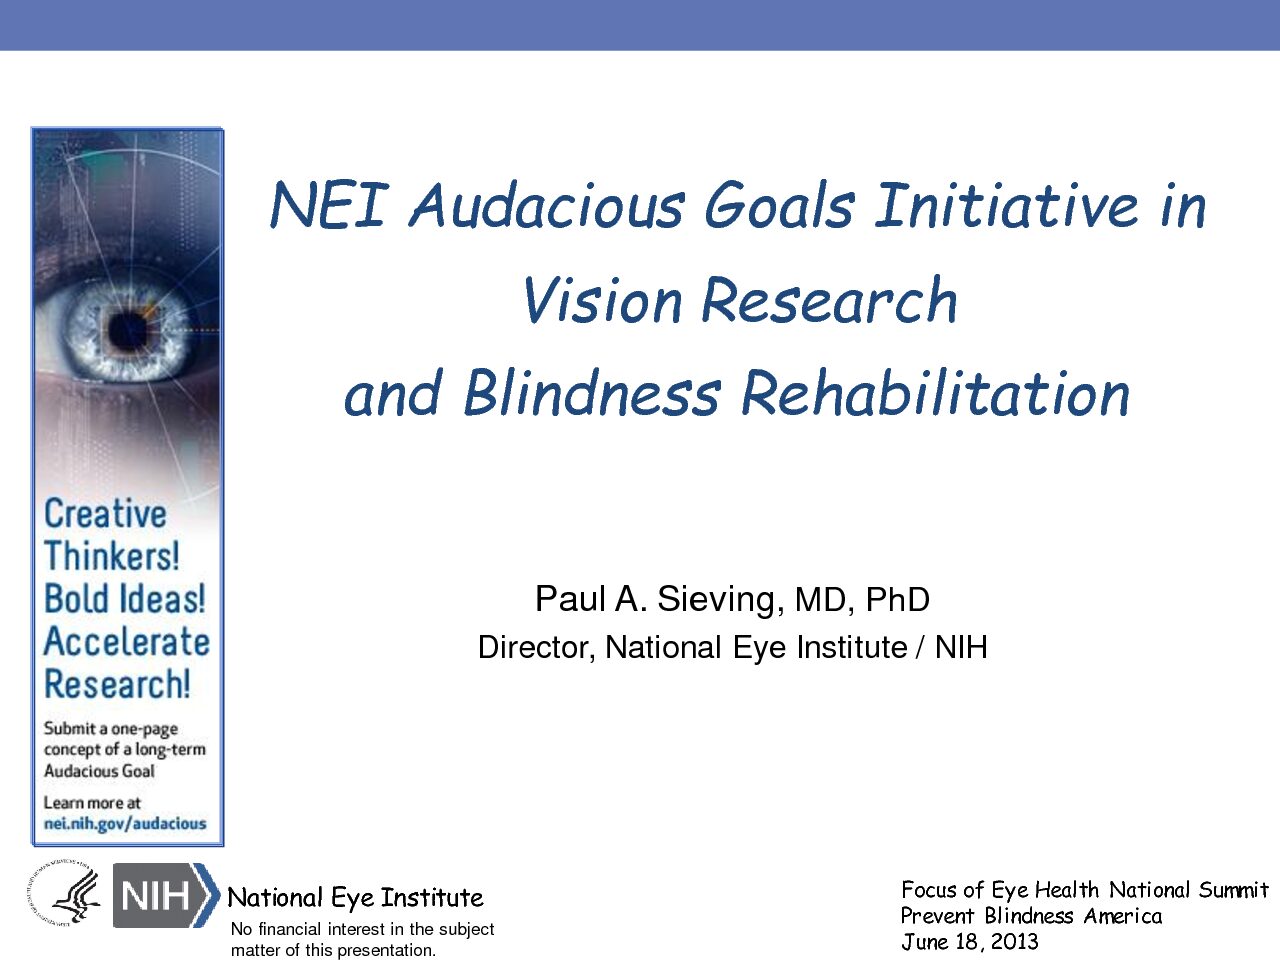 NEI Audacious Goals Initiative in Vision Research and Blindness Rehabilitation